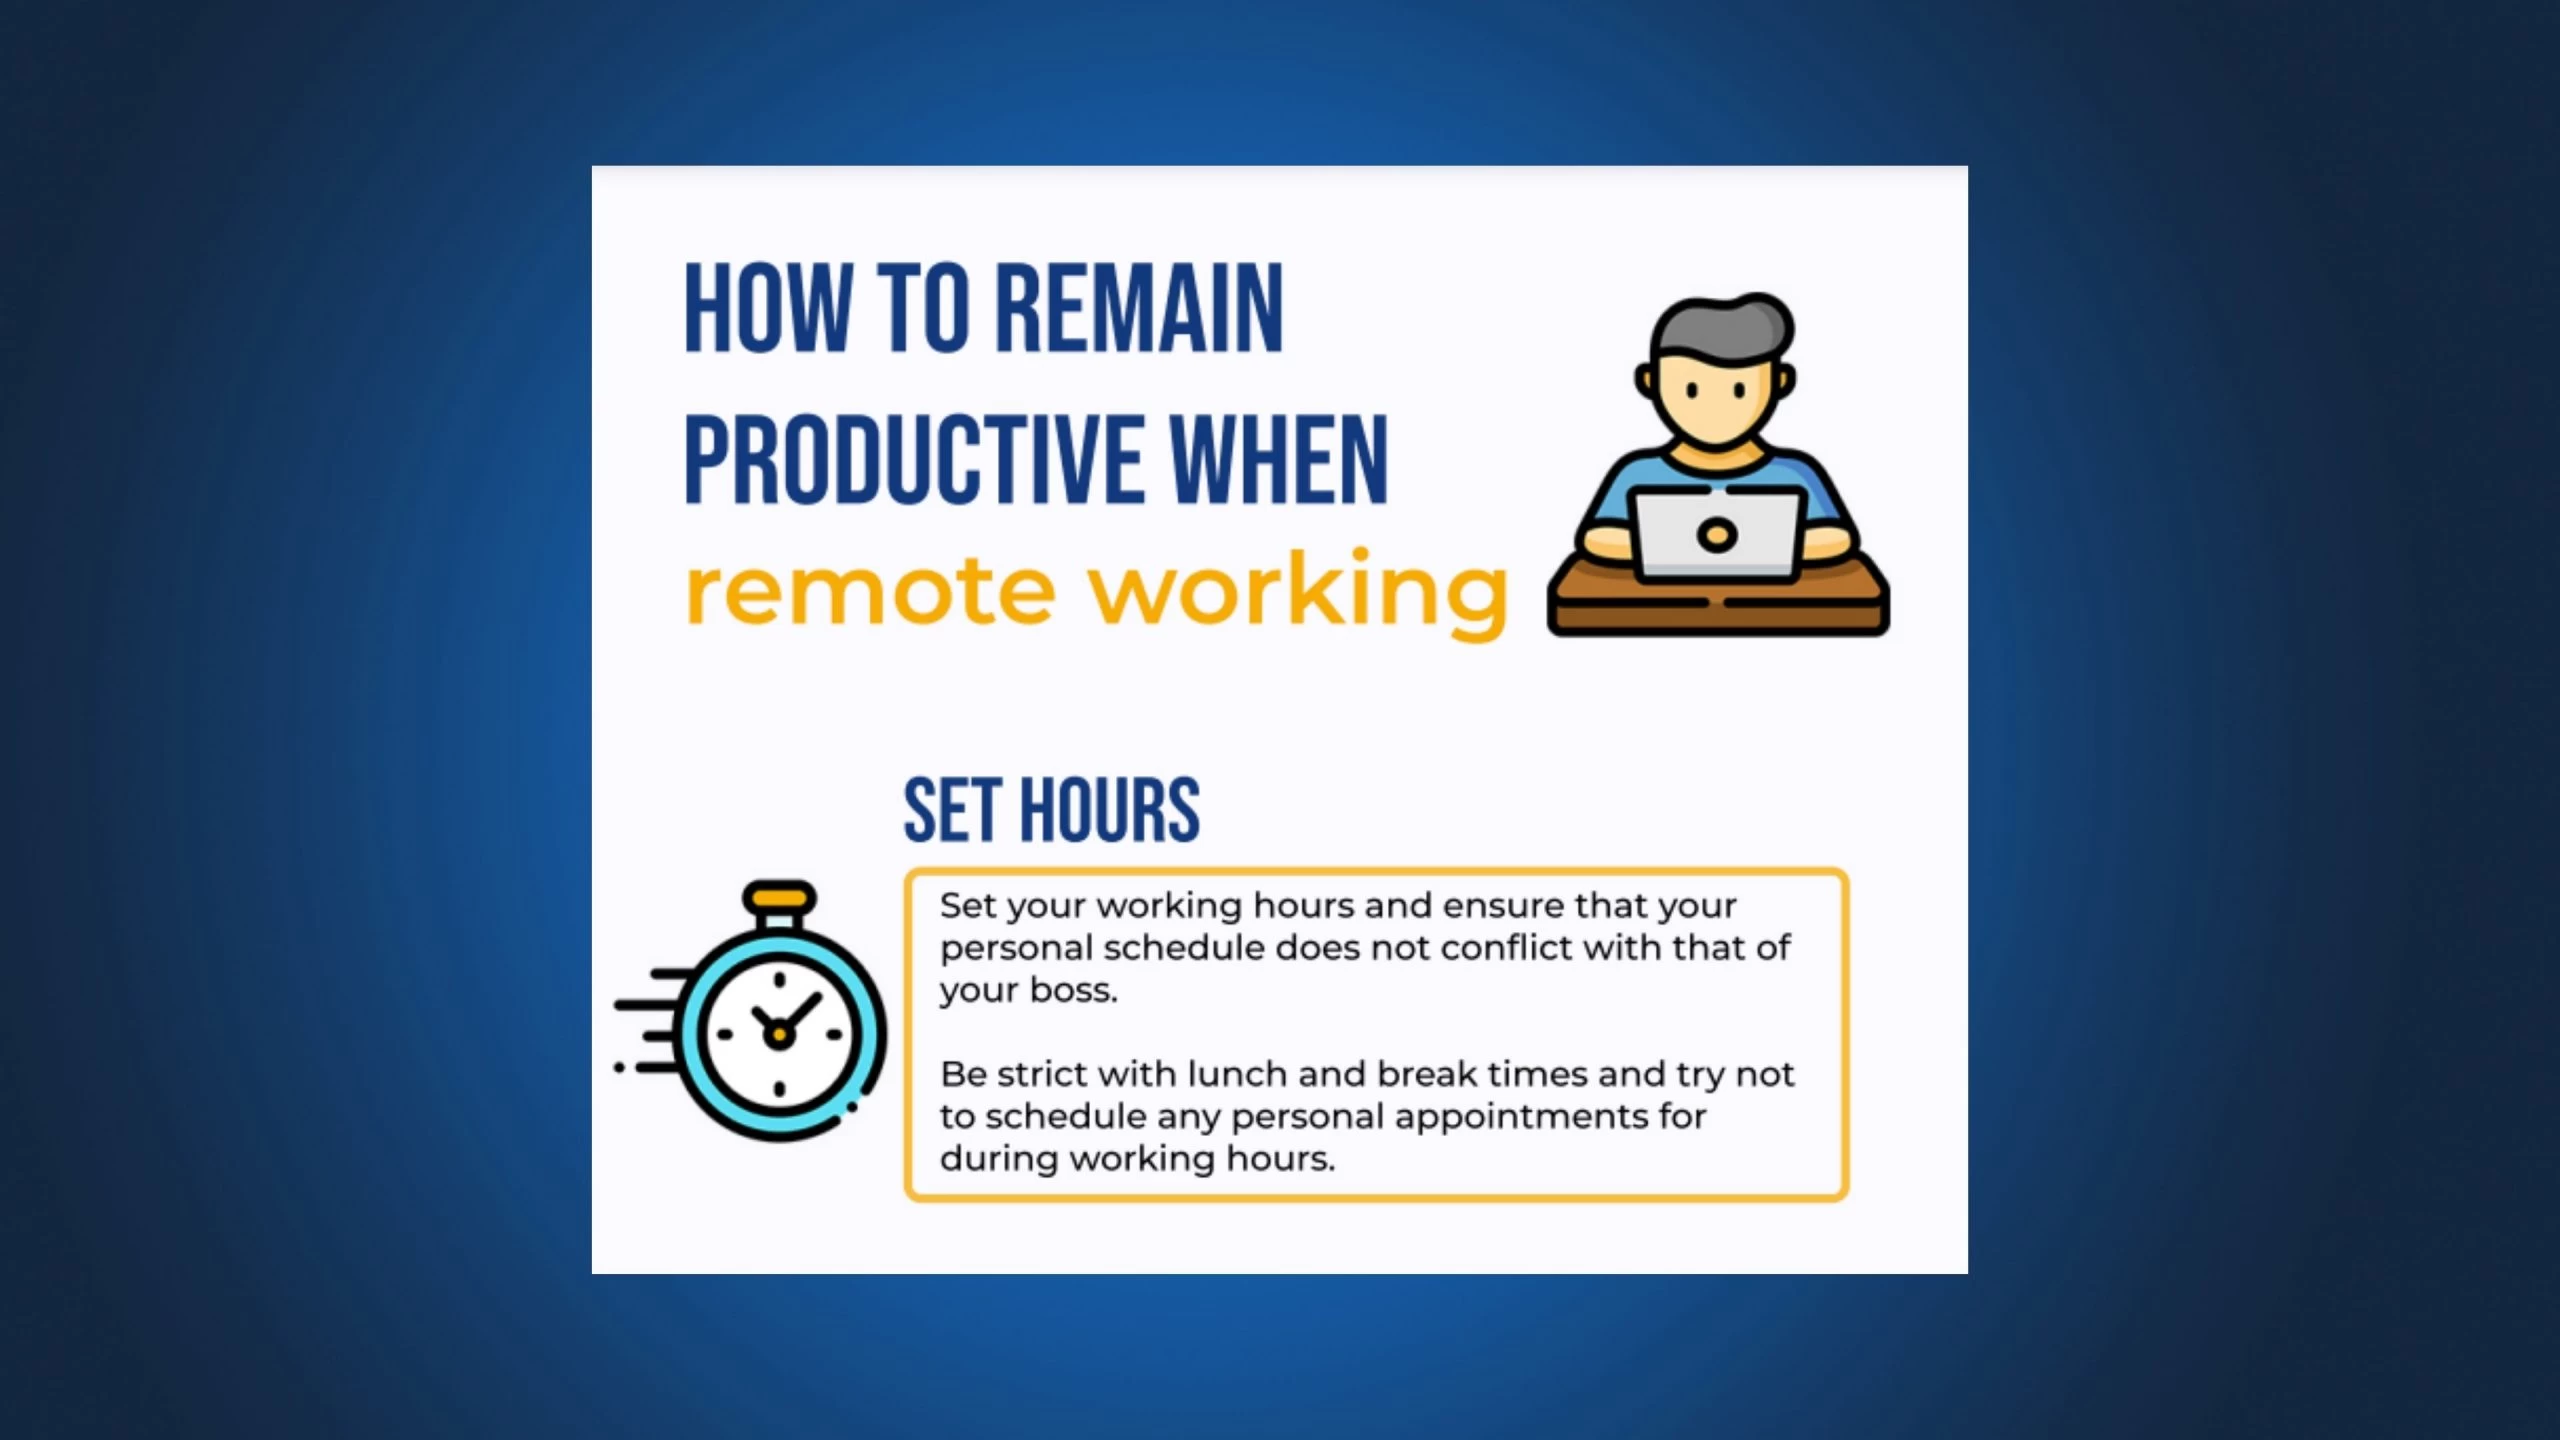 Keeping Productive when Remote Working